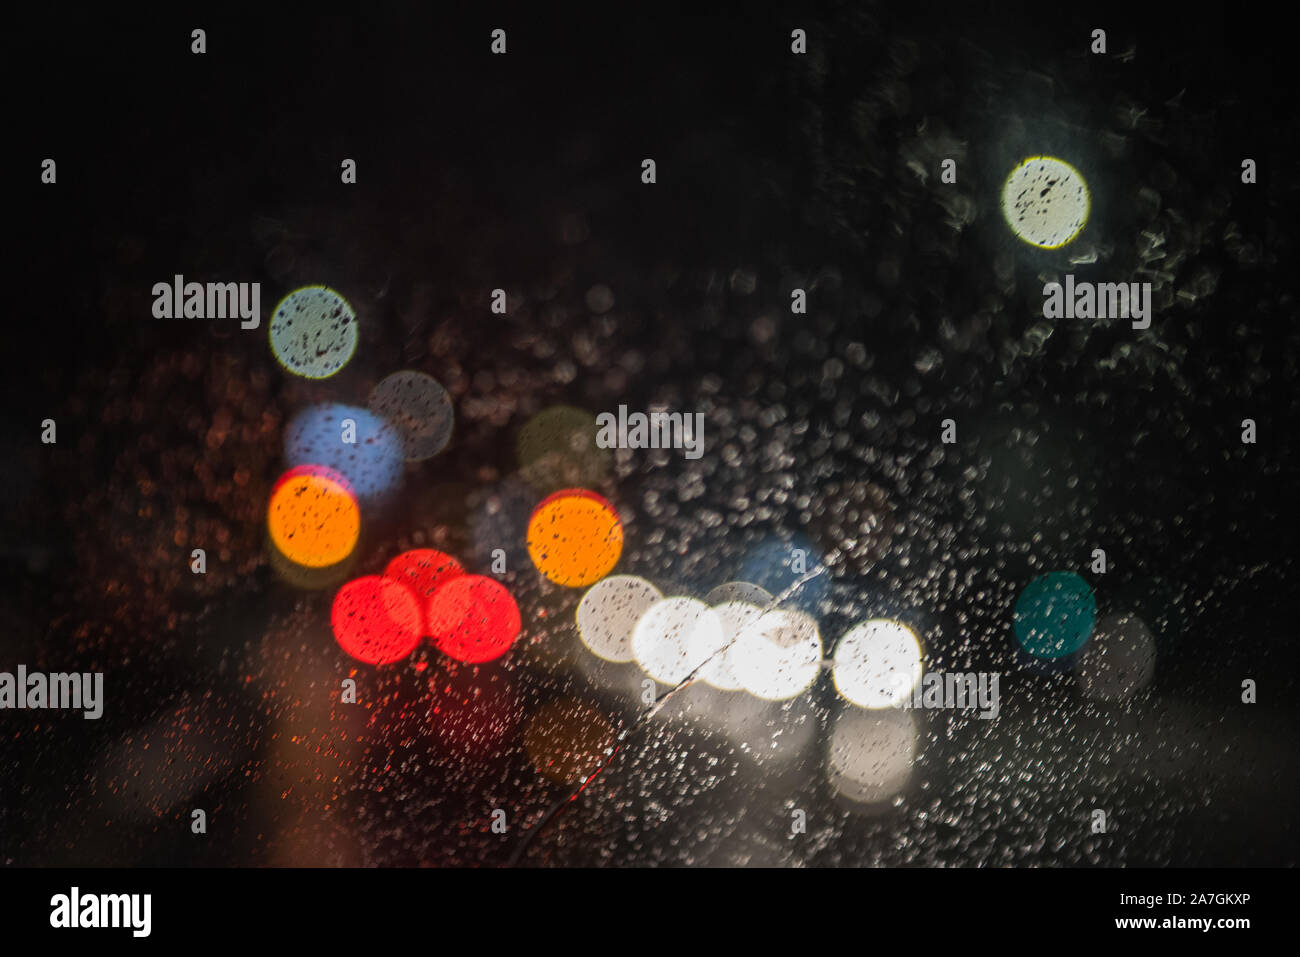 out of focus abstract car headlights in the rain with space for text on a dark background Stock Photo